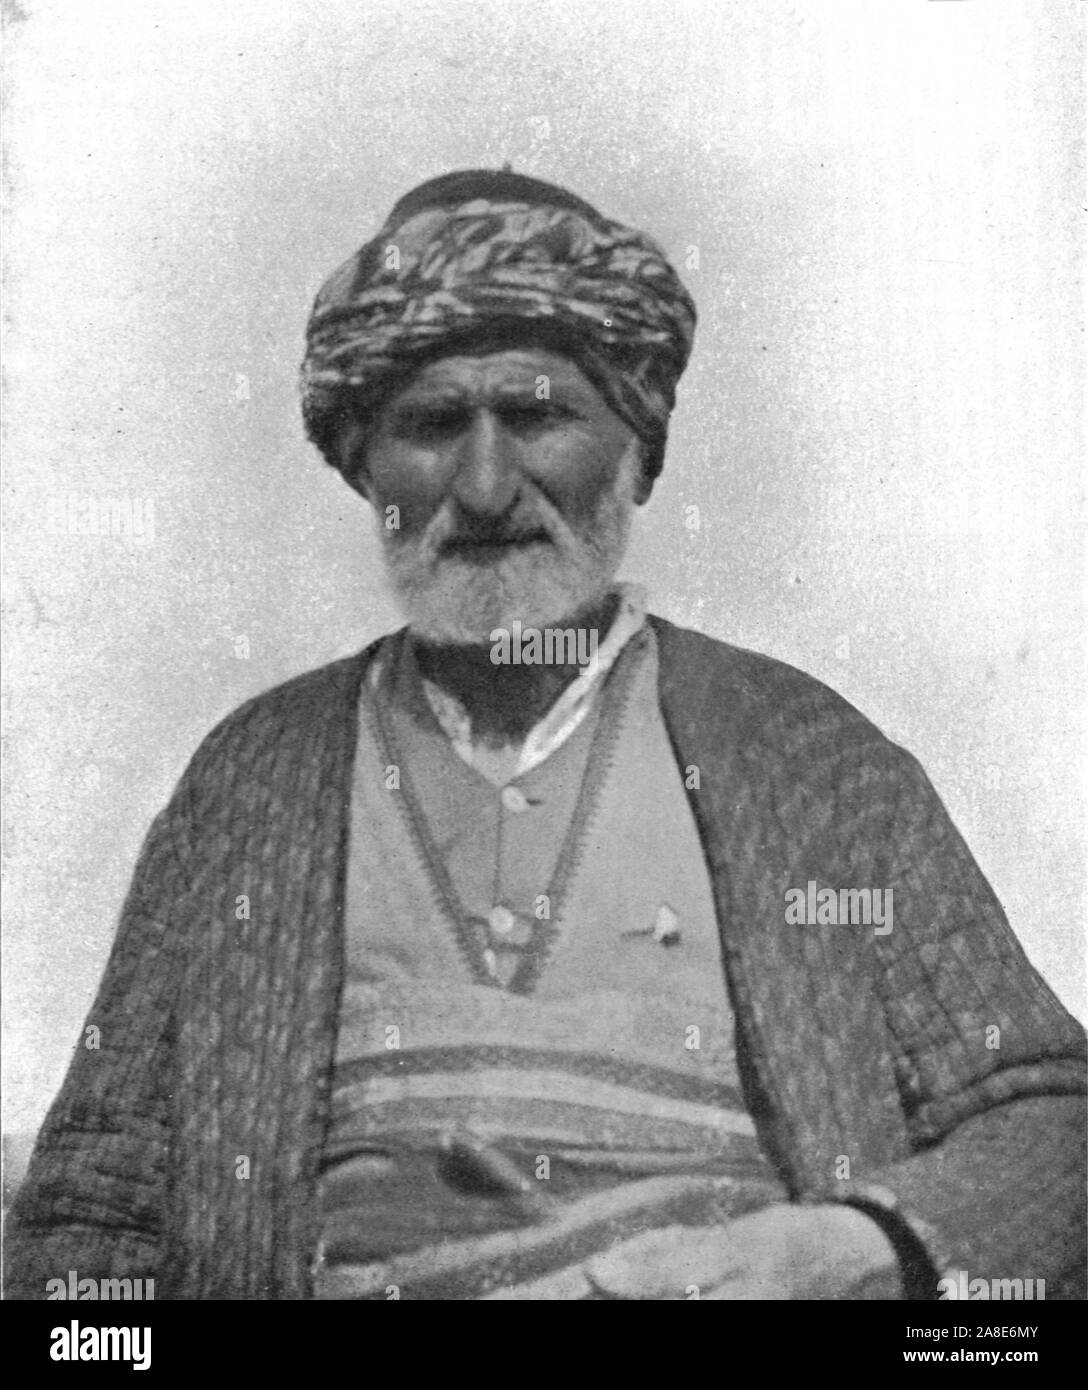 Turcoman at Chatal Hobak', c1906-1913, (1915). Elderly man wearing a padded  jacket, Central Asia, (Turkey?): 'On the top of Chatal Hobak I found an  encampment of Yederli Turkomans'. From "The Caliphs' Last